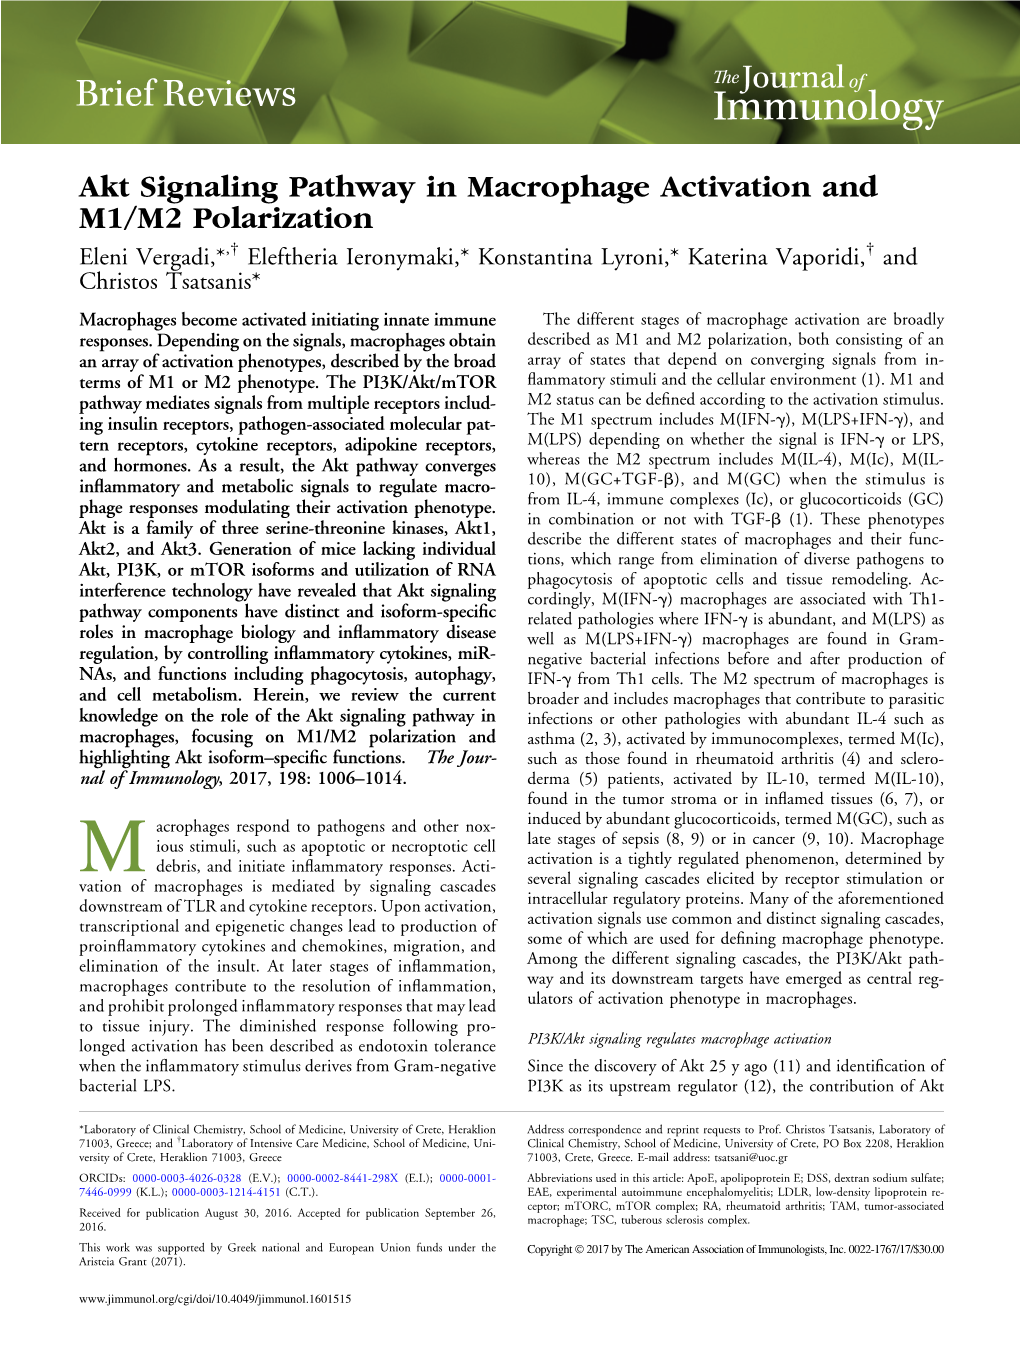 Akt Signaling Pathway in Macrophage Activation and M1/M2 Polarization